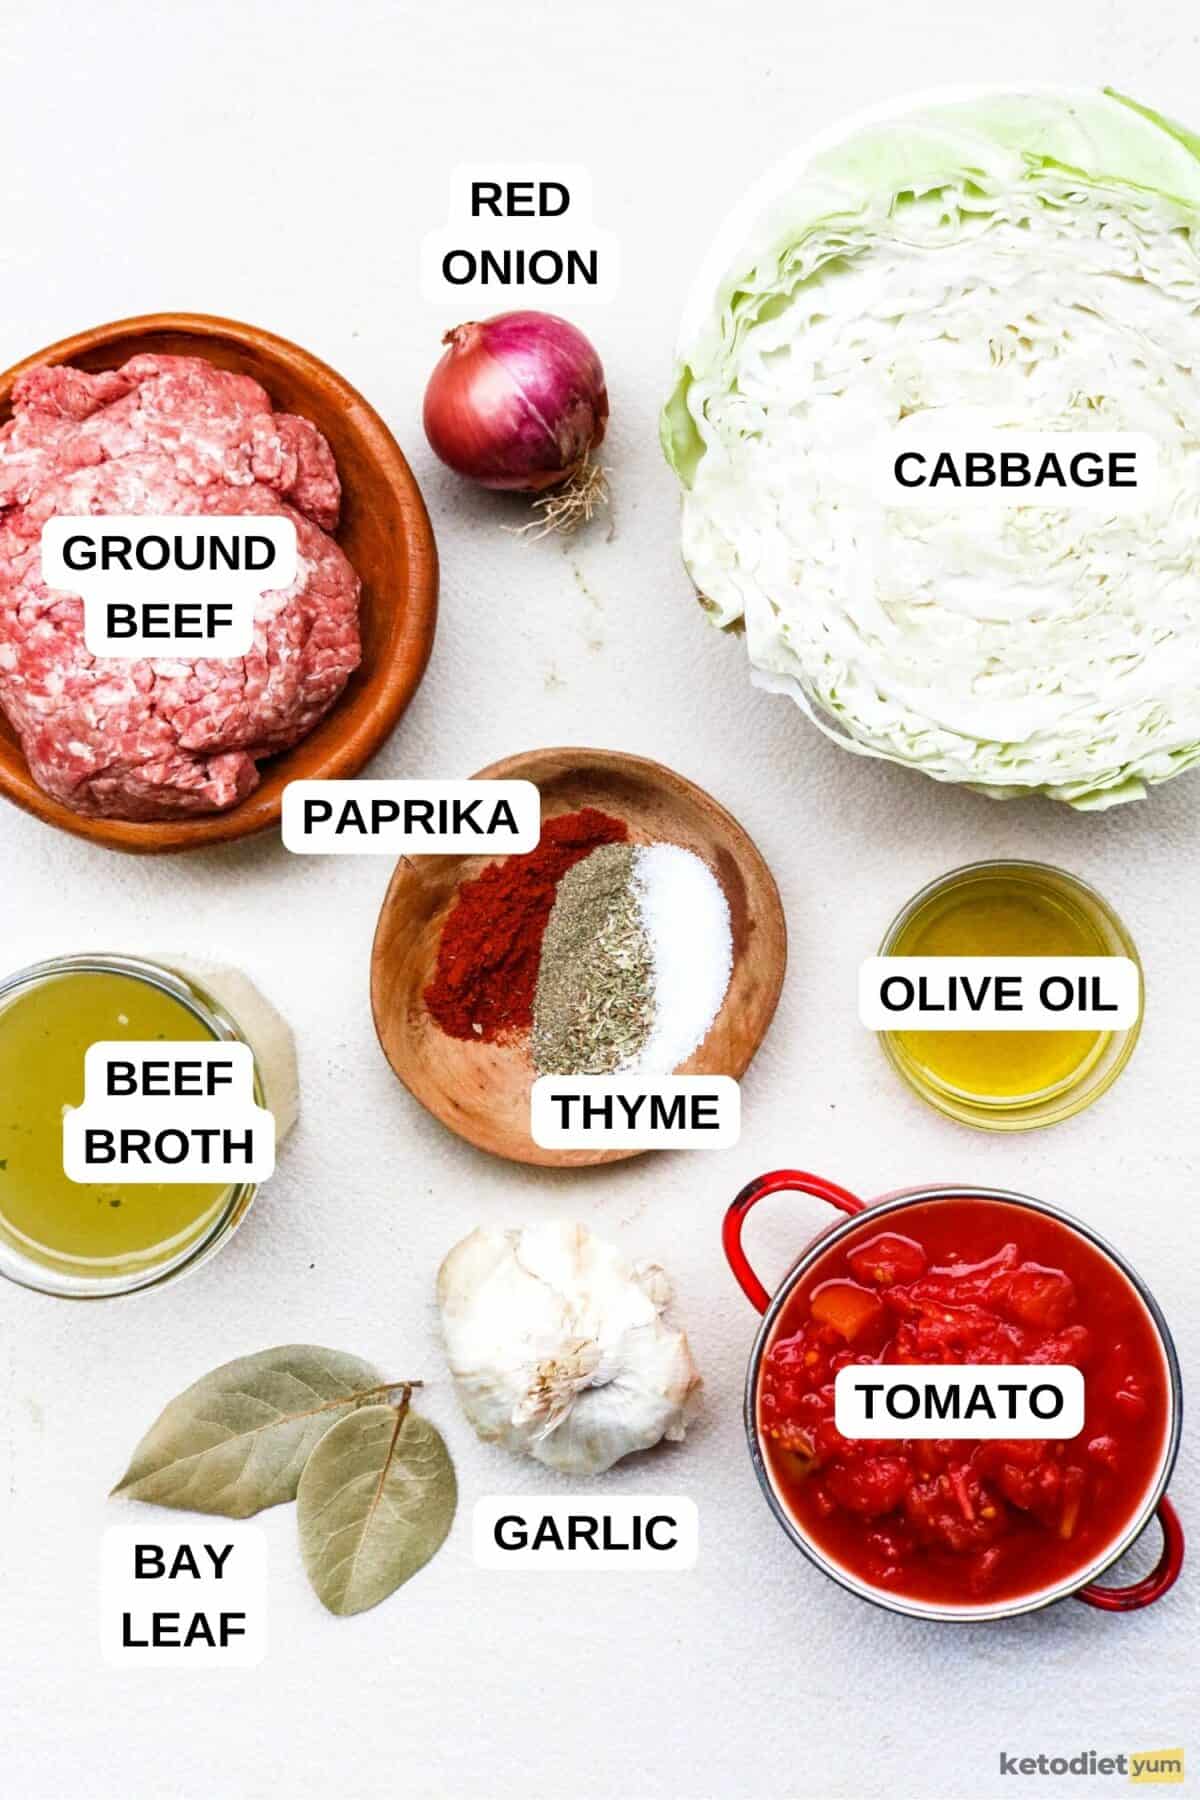 Ingredients arranged on a table to make tomato cabbage soup